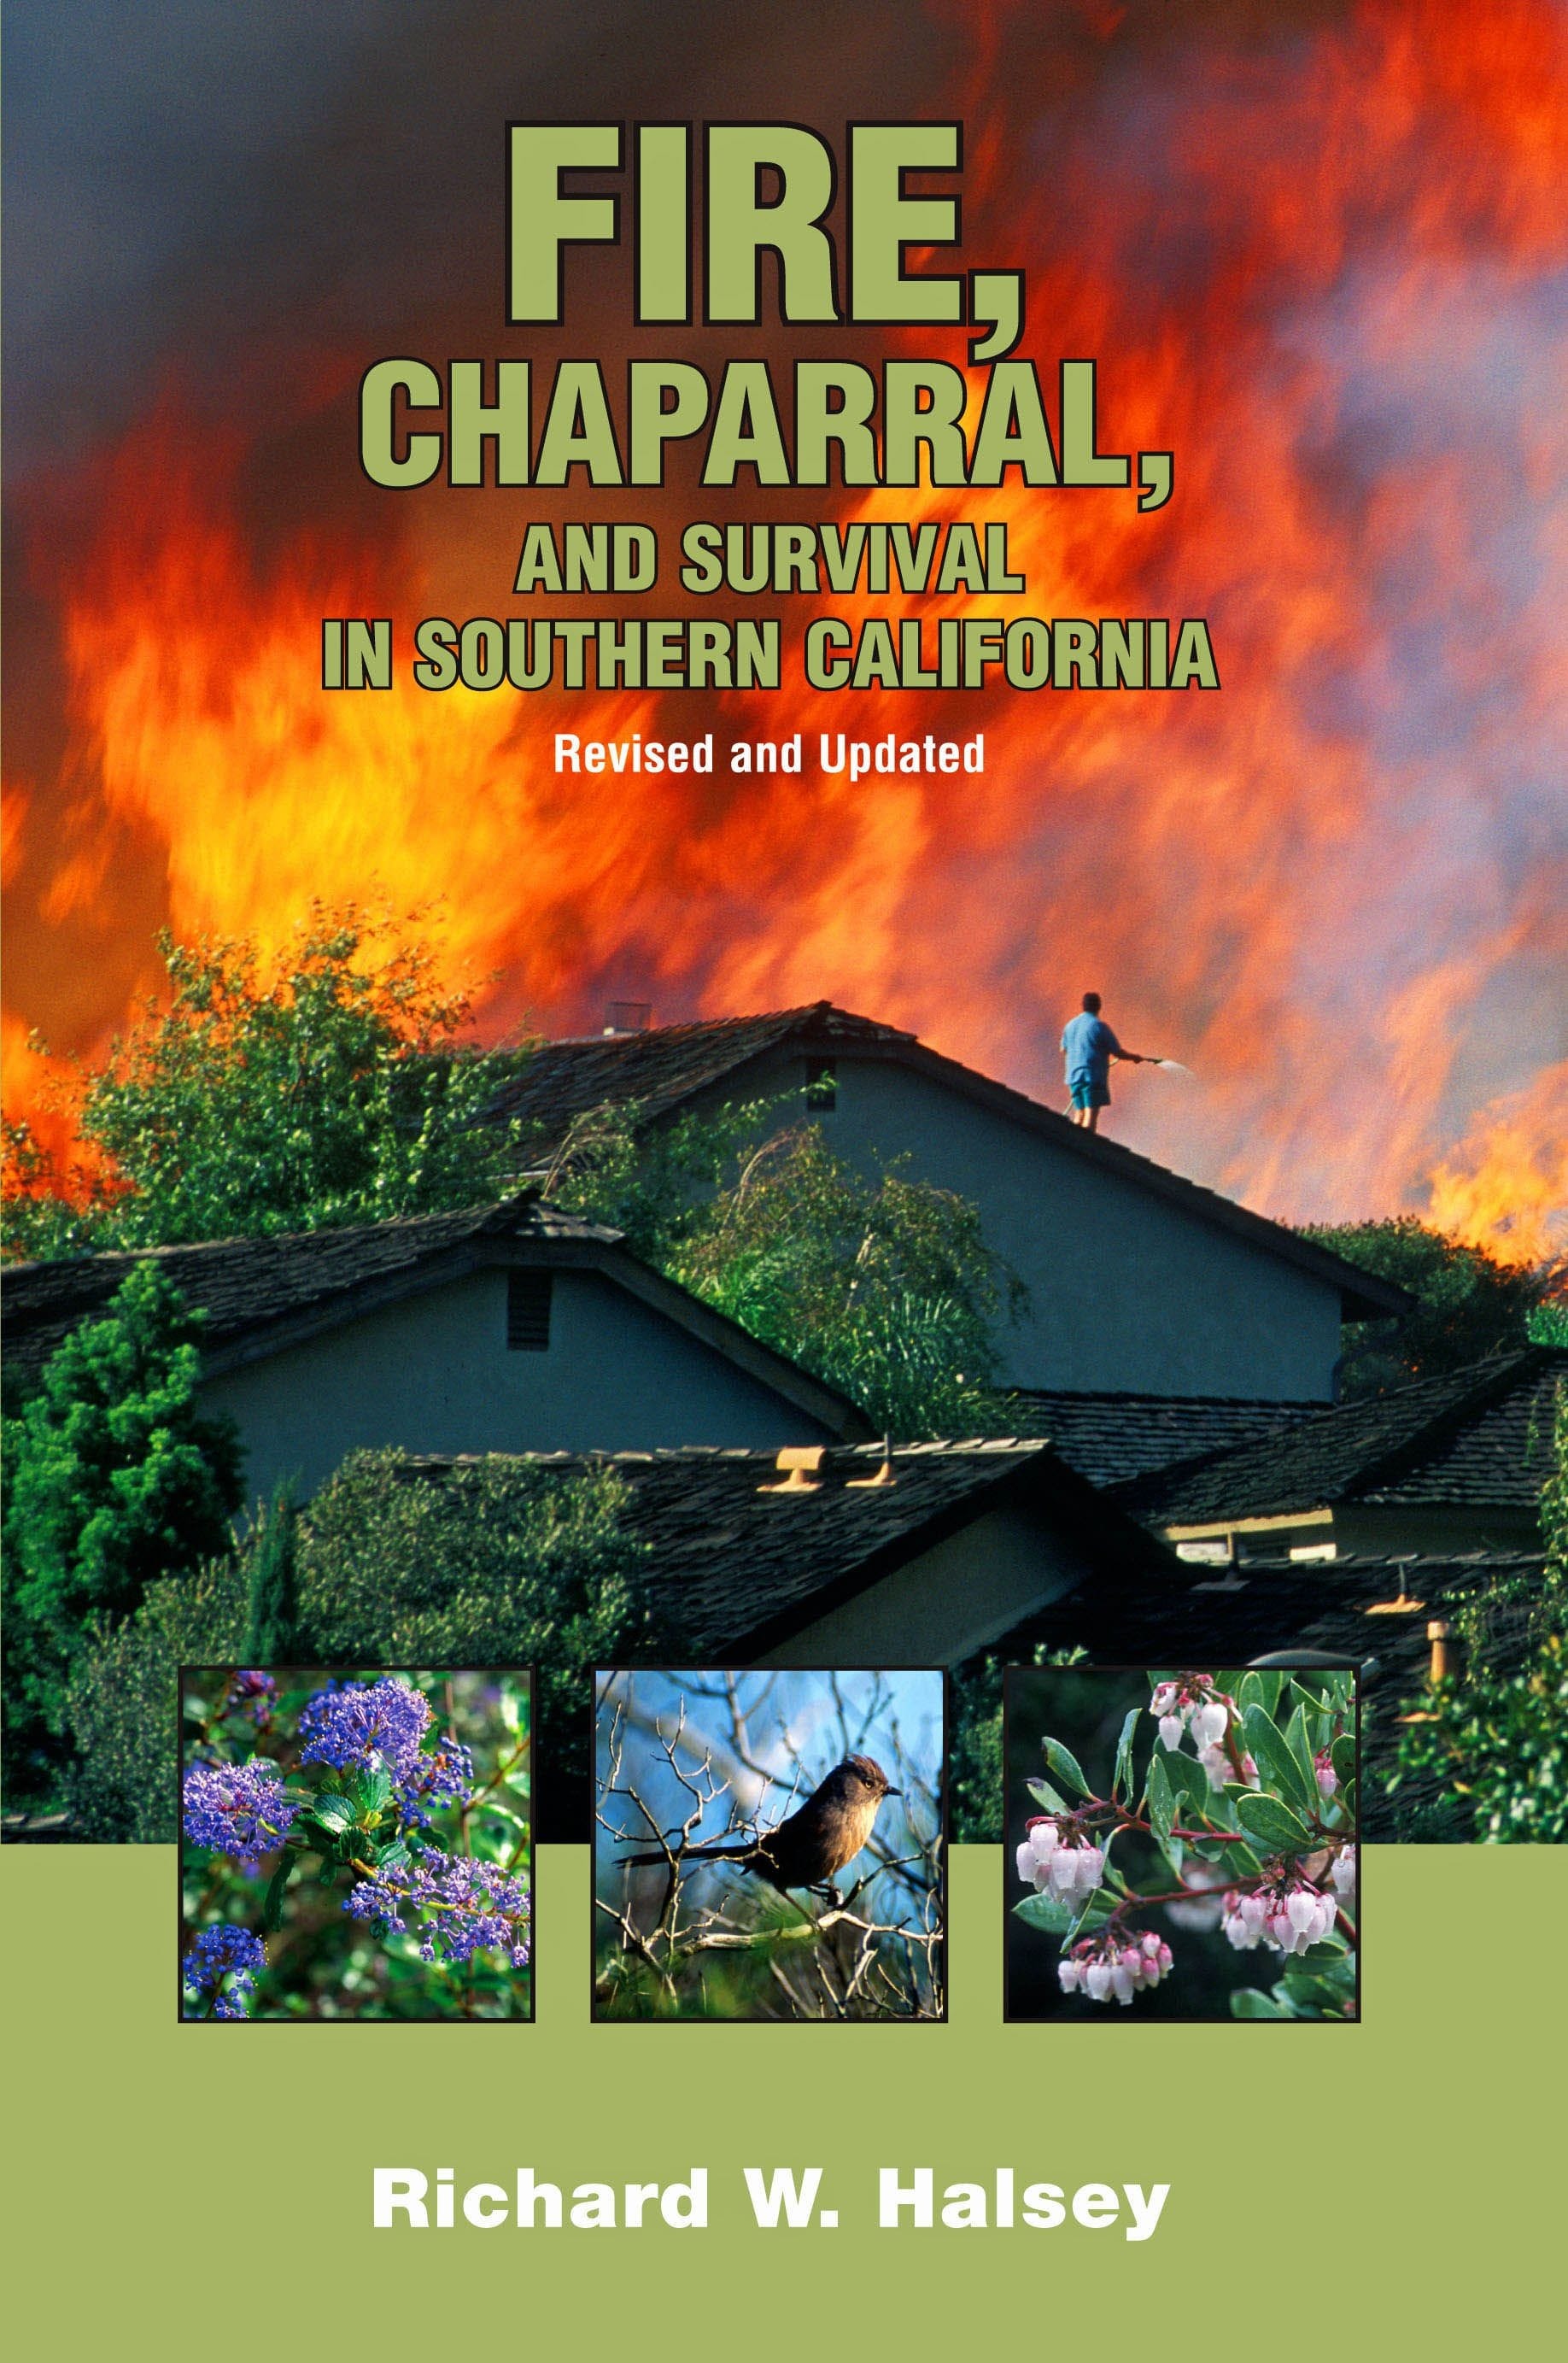 The revised and updated 2nd edition of the best book on the chaparral biome and wildfire.